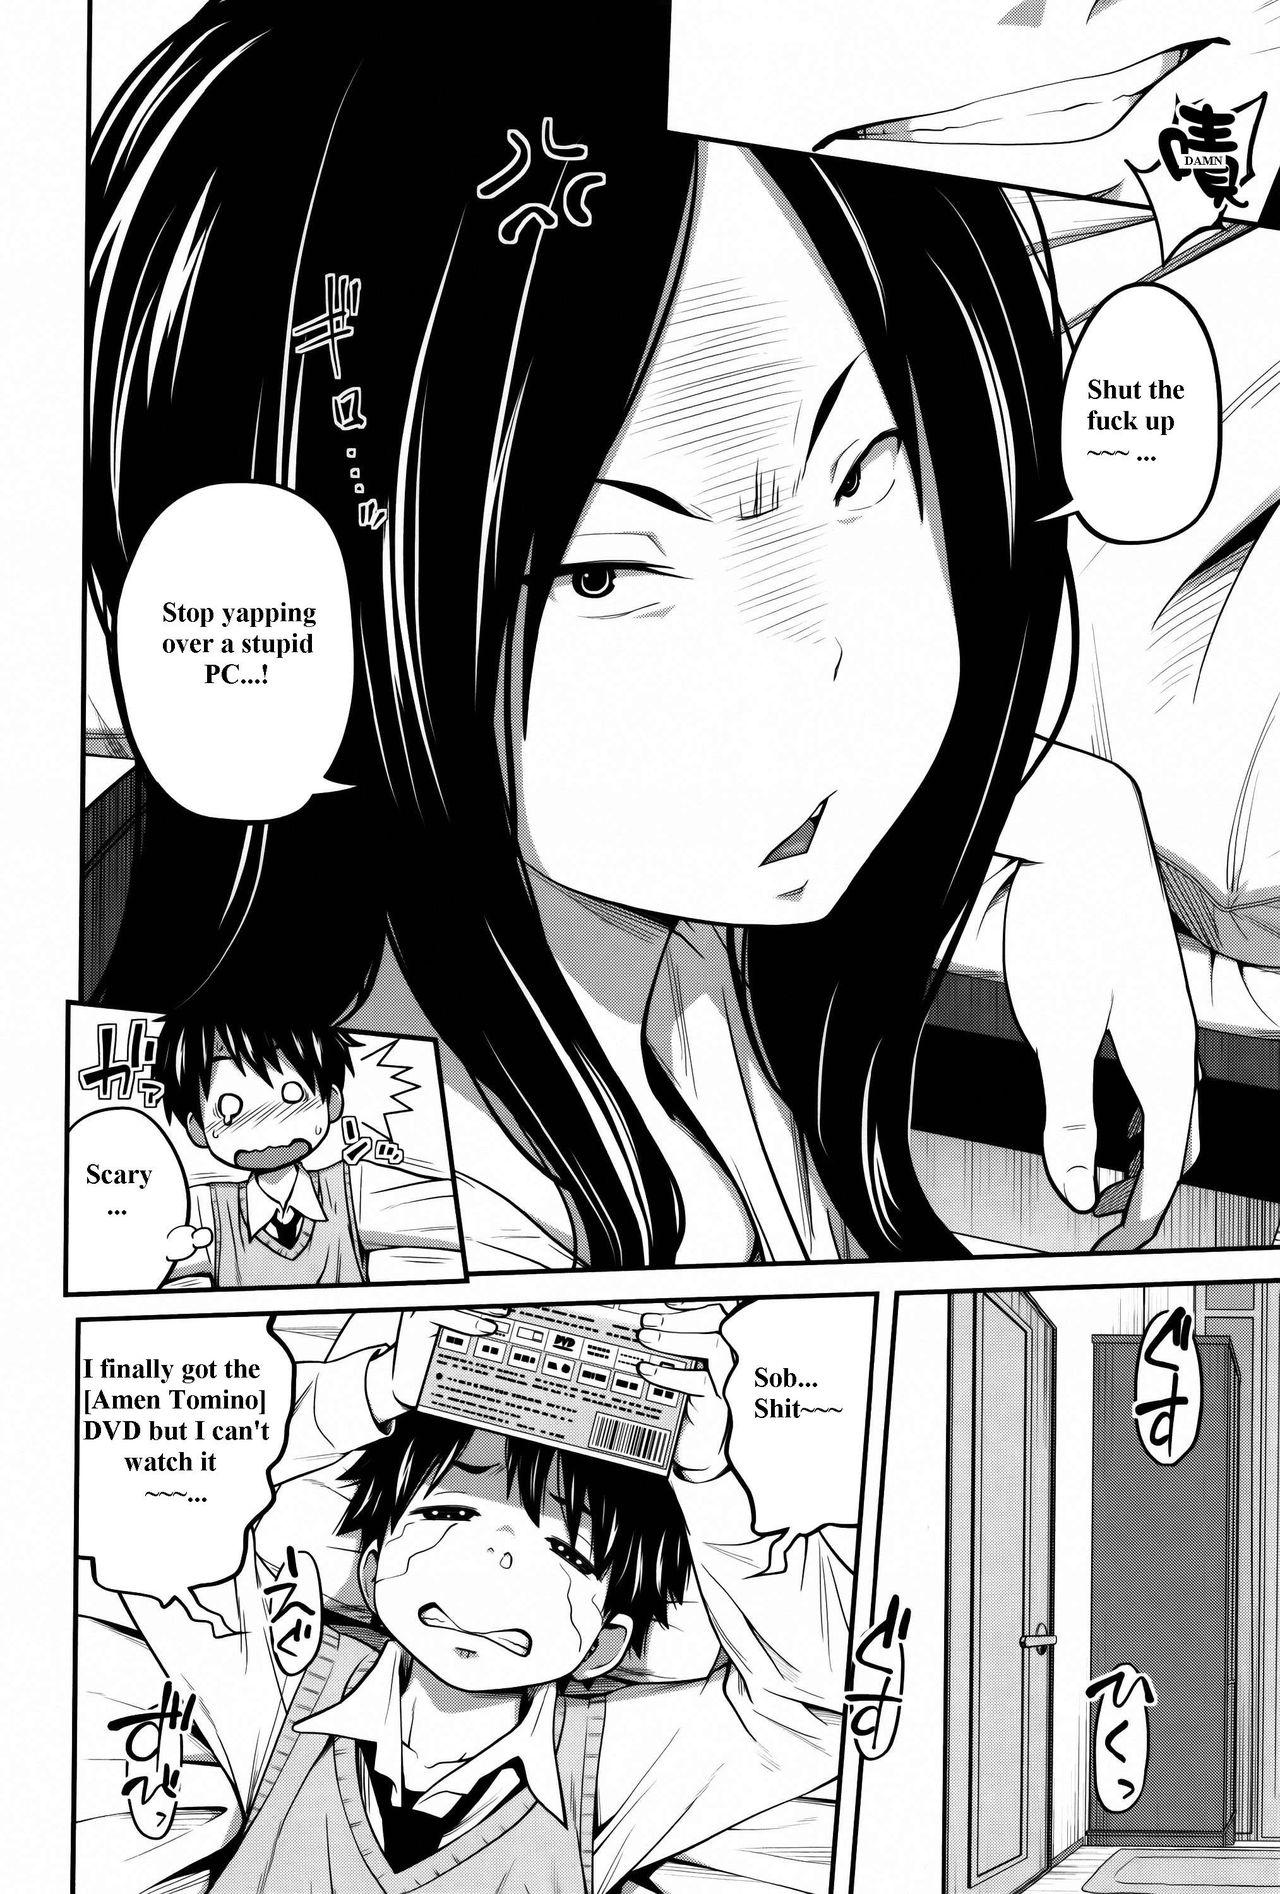 Daily Sisters Ch. 1 13